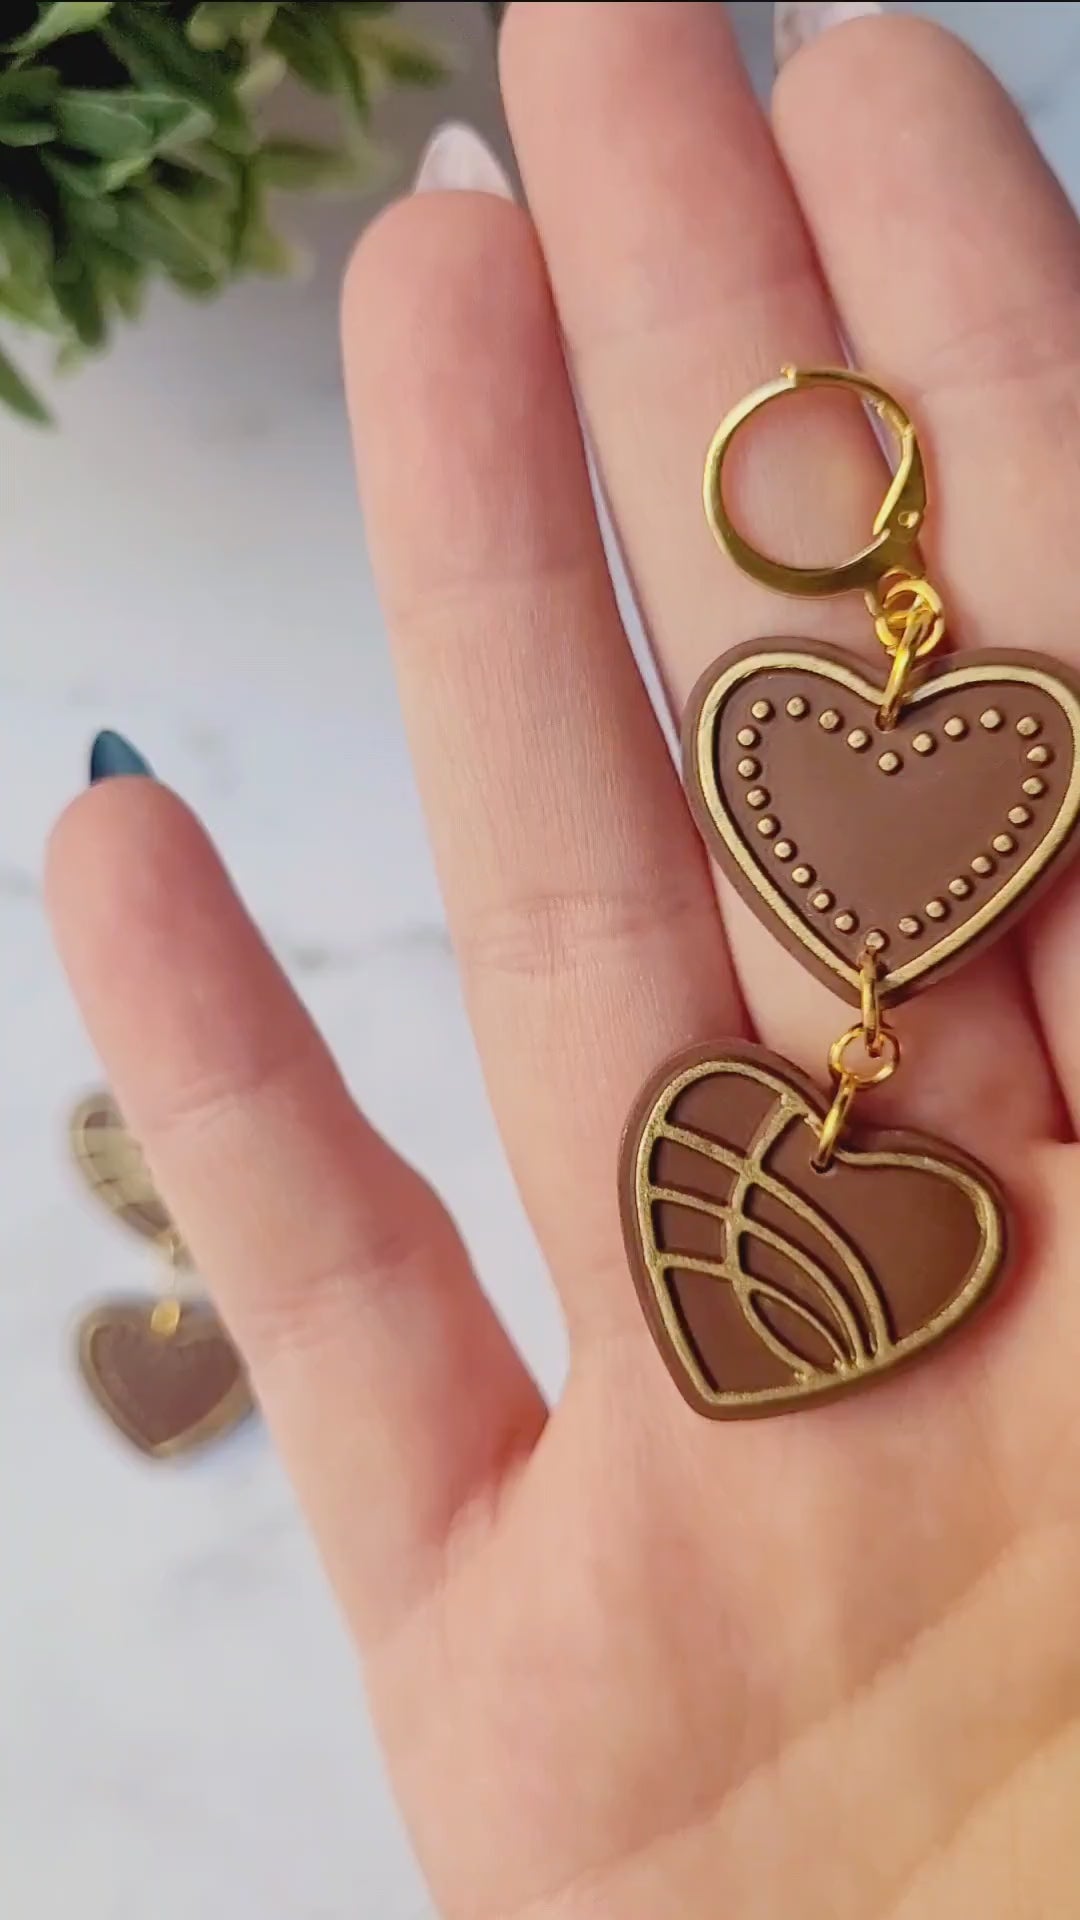 video close up of Chocolate and gold heart truffle earrings on a white background.